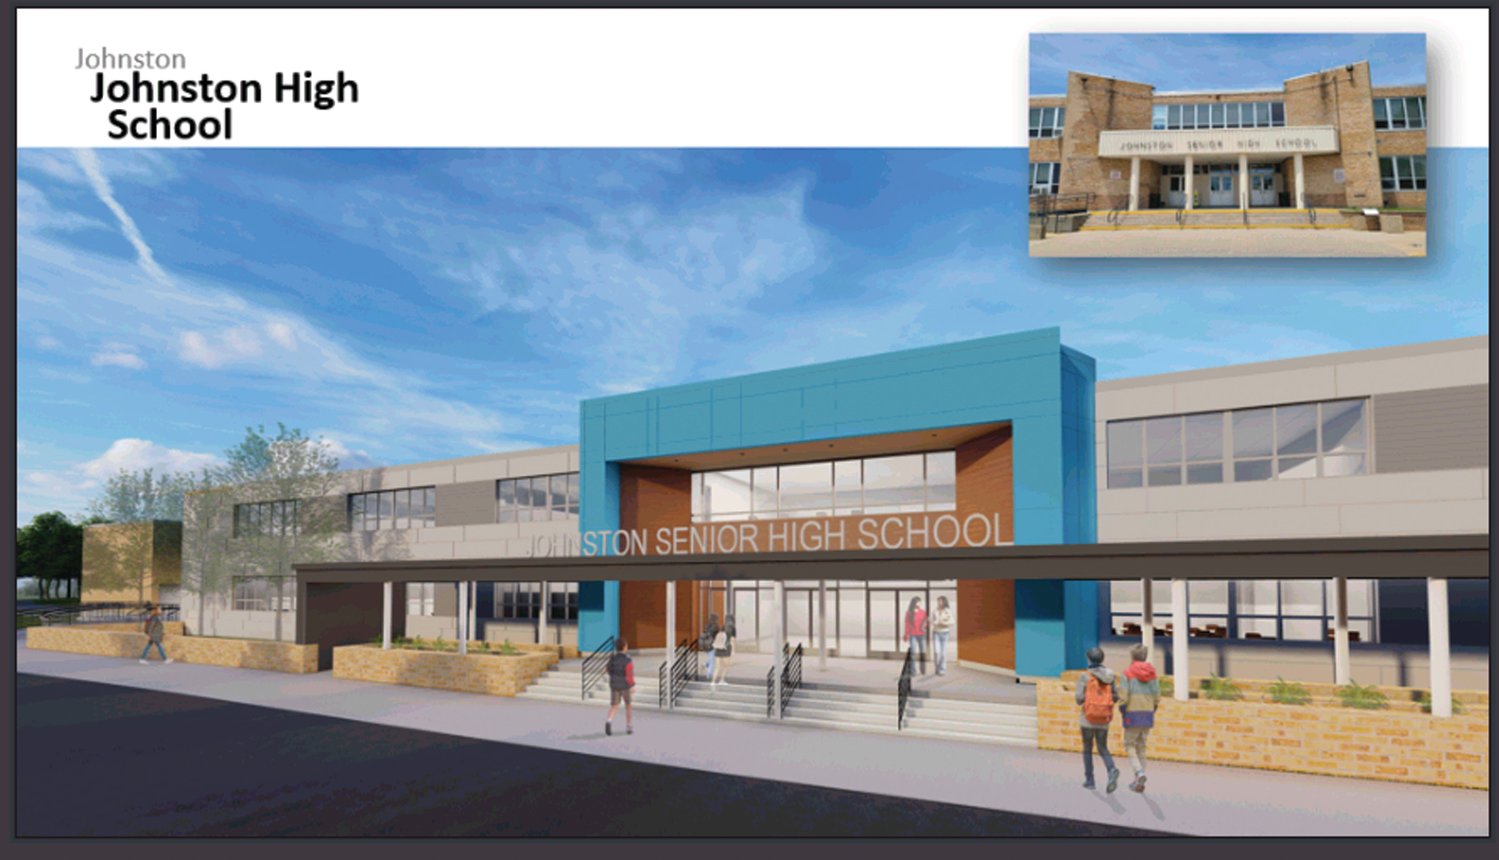 Johnston High School
STATUS: Renovations
LOCATION: Expansion of the current high school at 345 Cherry Hill Road
STUDENT BODY: Approximately 799 students in grades 9-12
PRICE TAG: $57 million
OPENING DATE: Tentatively scheduled to open in late summer of 2024.